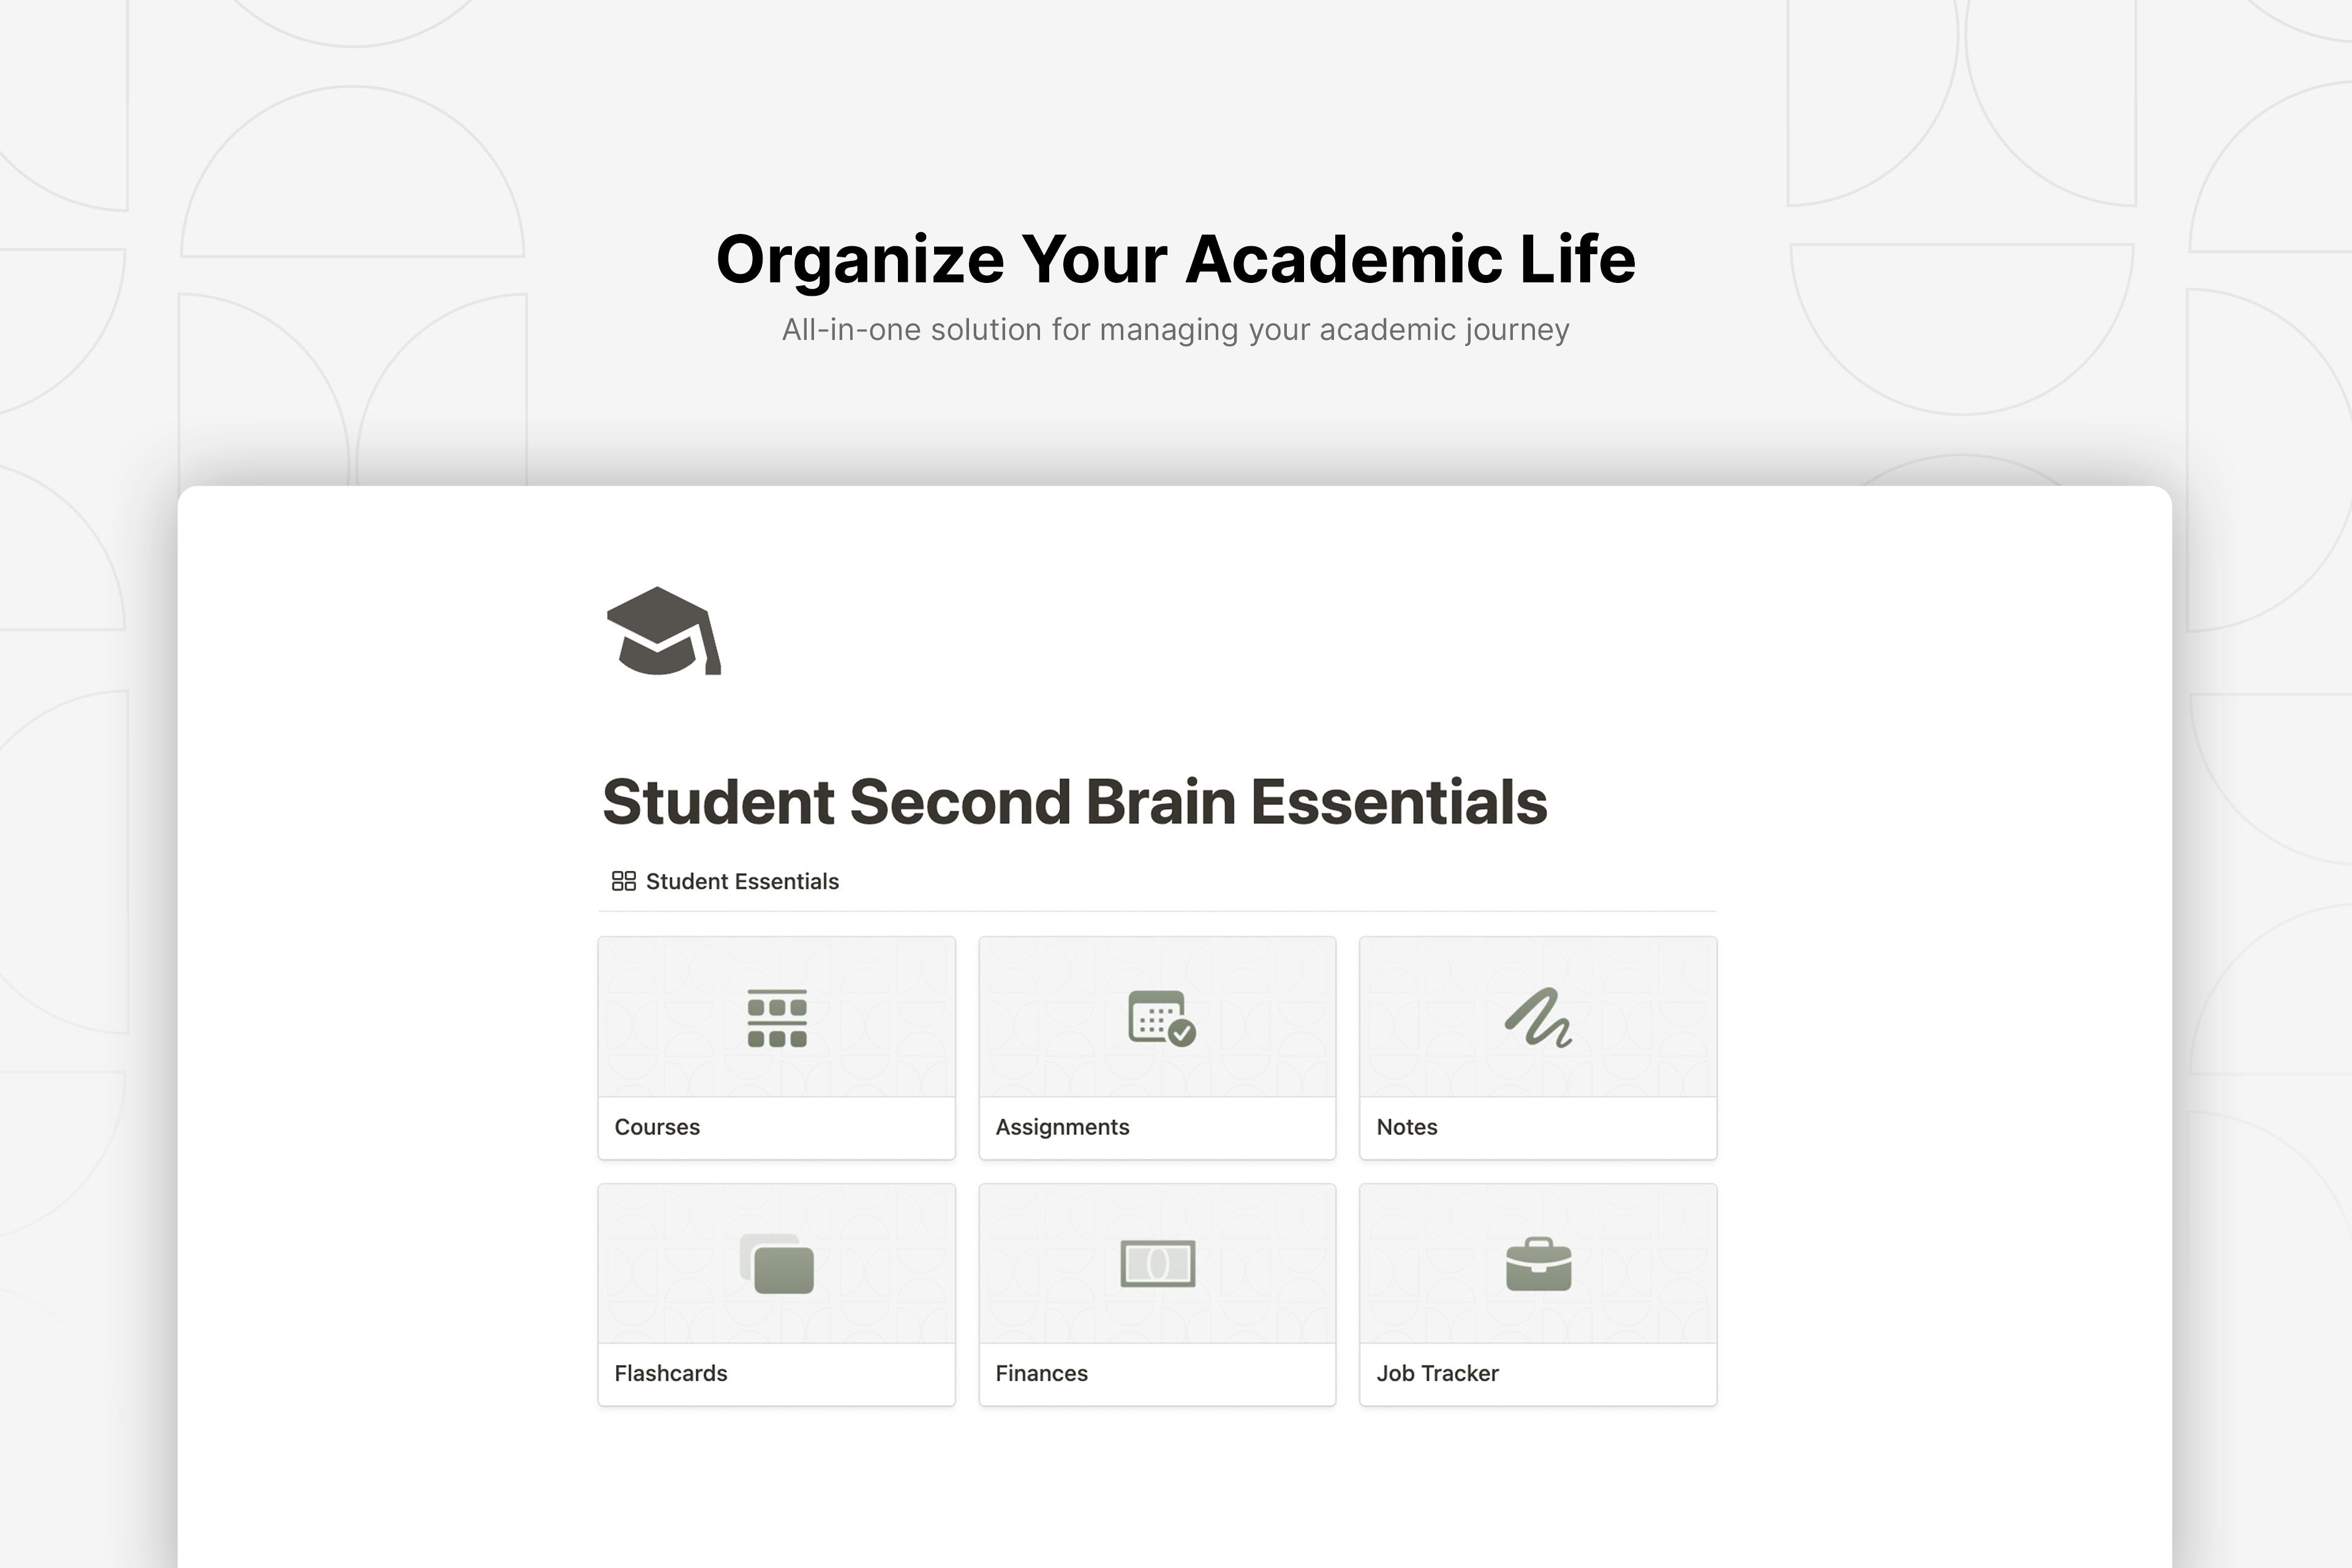 The Student Essentials helps students efficiently organize their academic life.